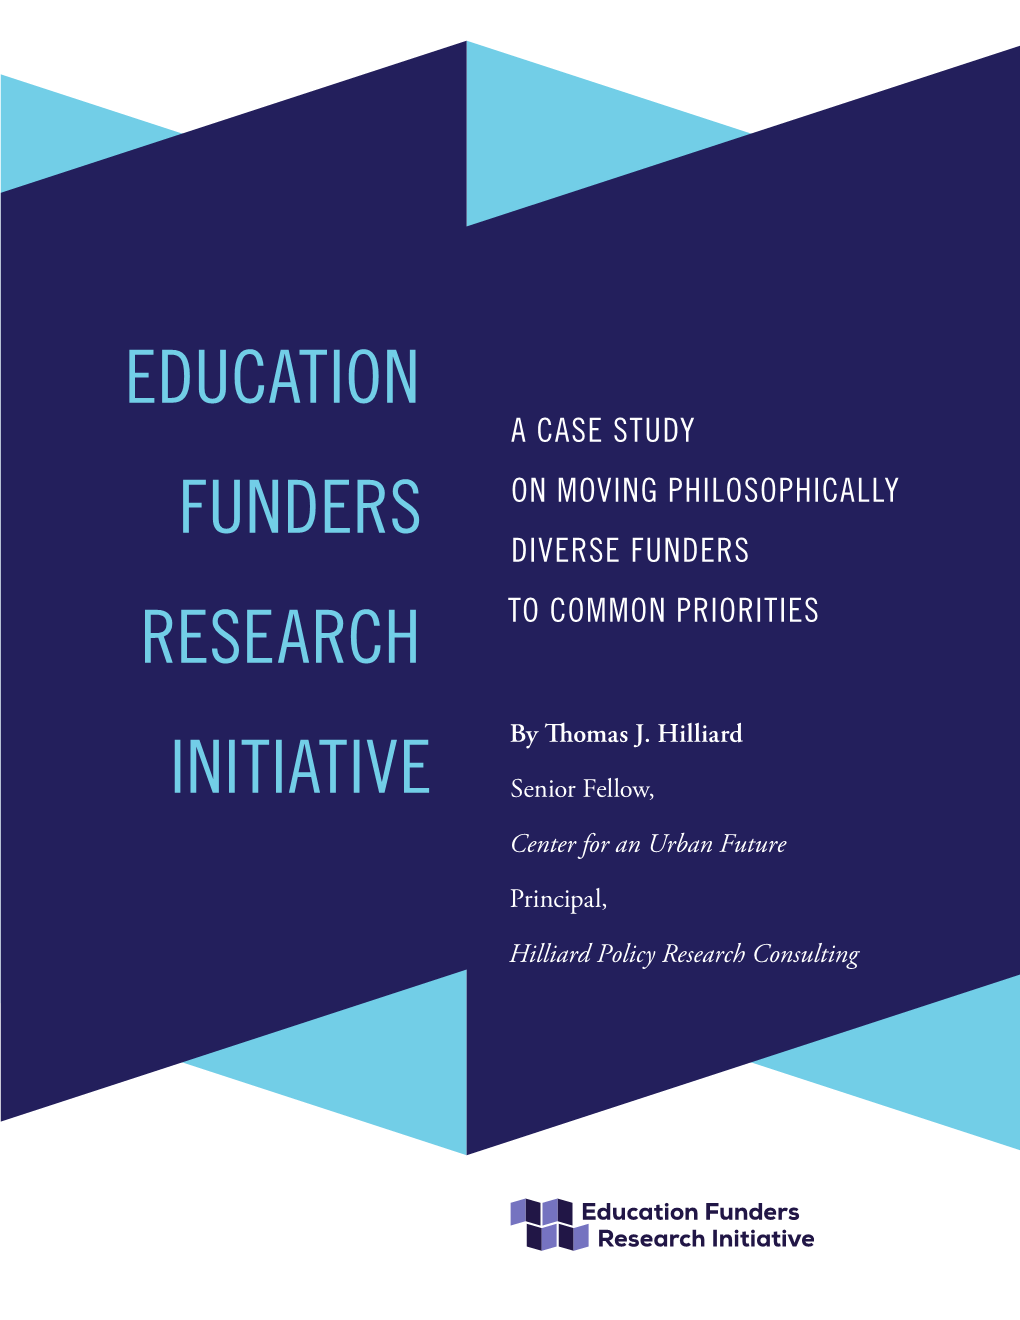 Education Funders Research Initiative